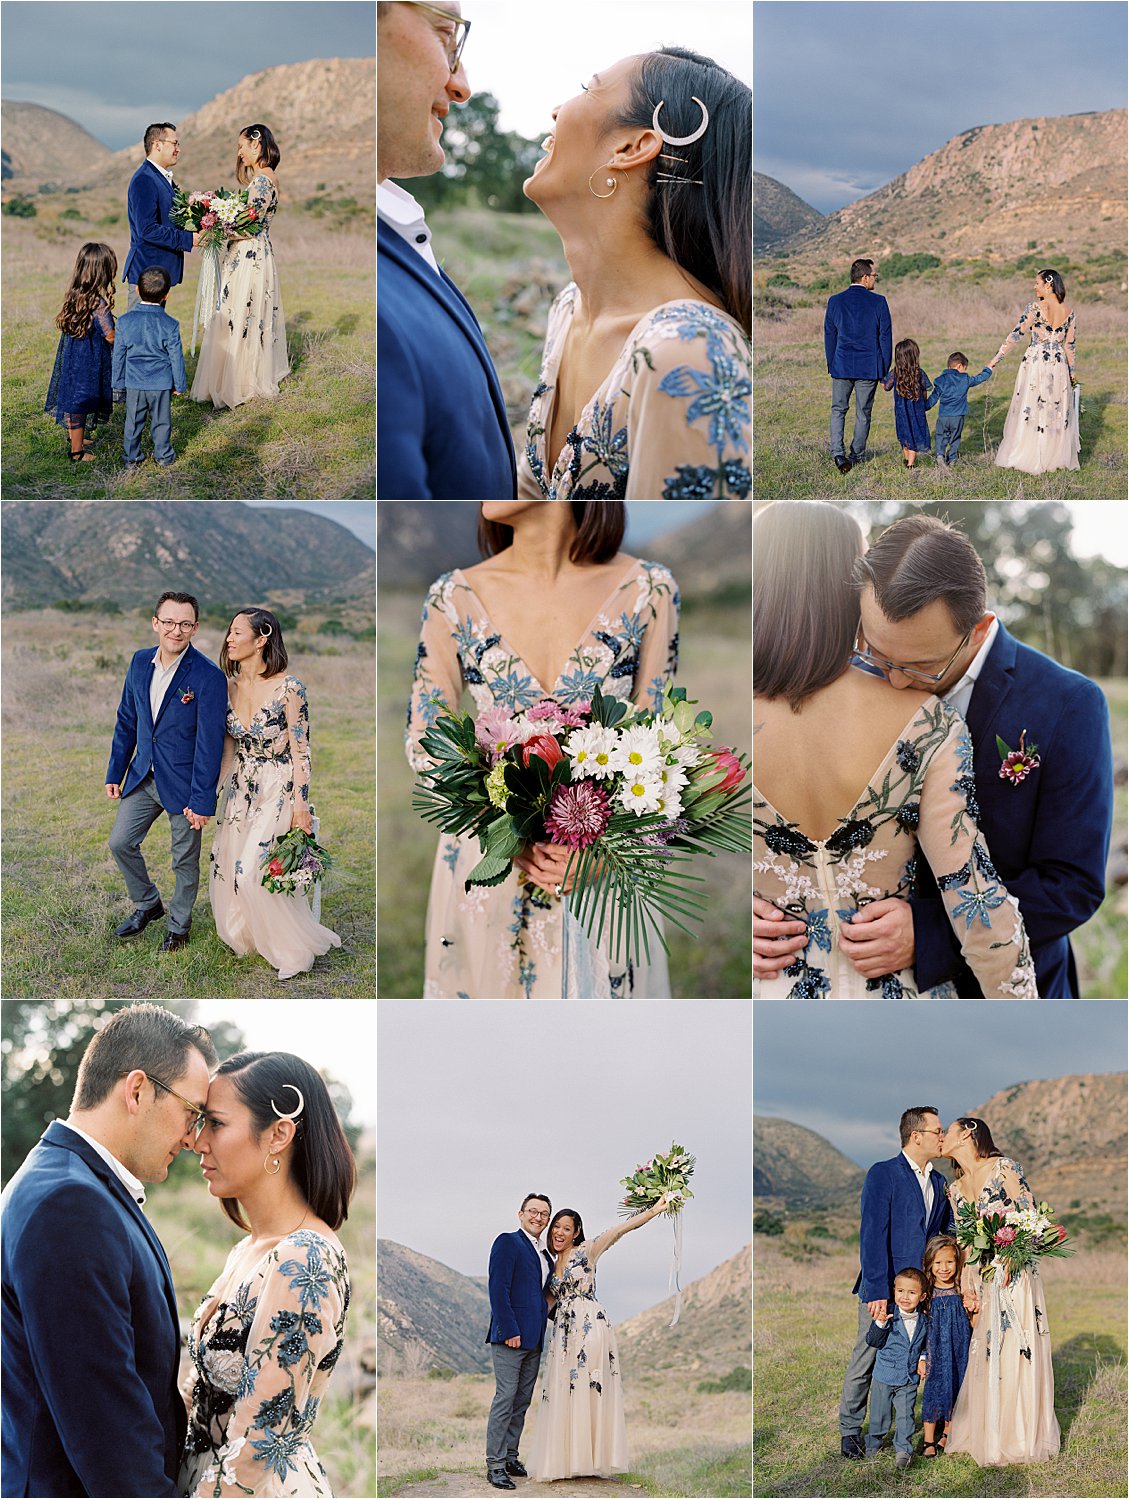 Melissa and Brian's San Diego Vow Renewal at Mission Trails by San Diego Film Wedding and Anniversary Photographer, Renee Hollingshead. These two celebrated their 10th wedding anniversary by renewing their vows with their two kids nearby their family home.